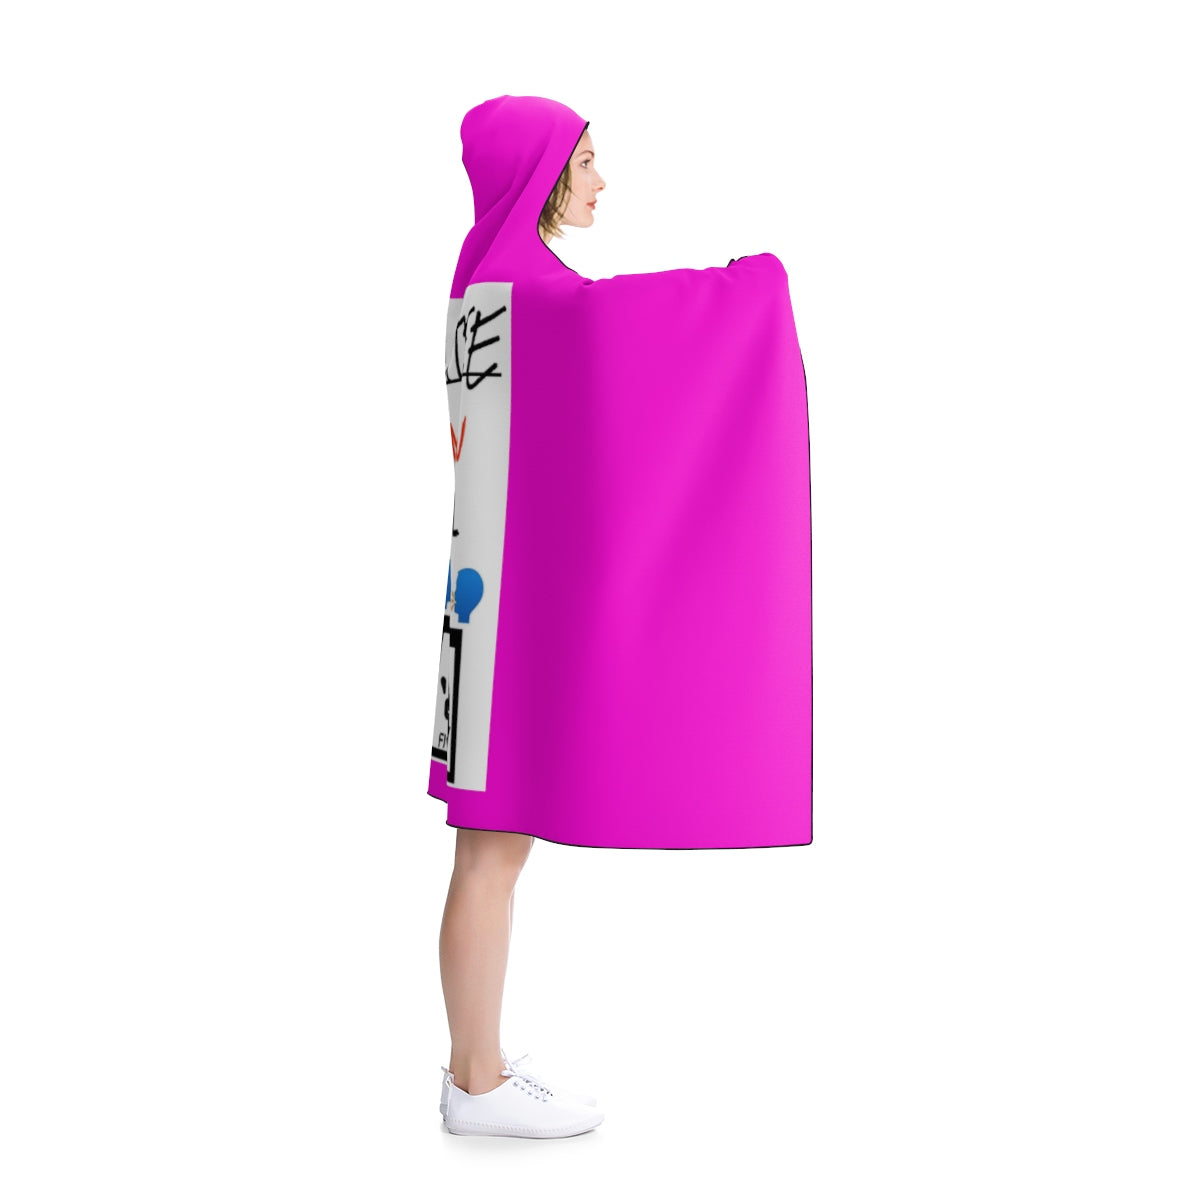 Five Toes Down New Normal Hooded Blanket